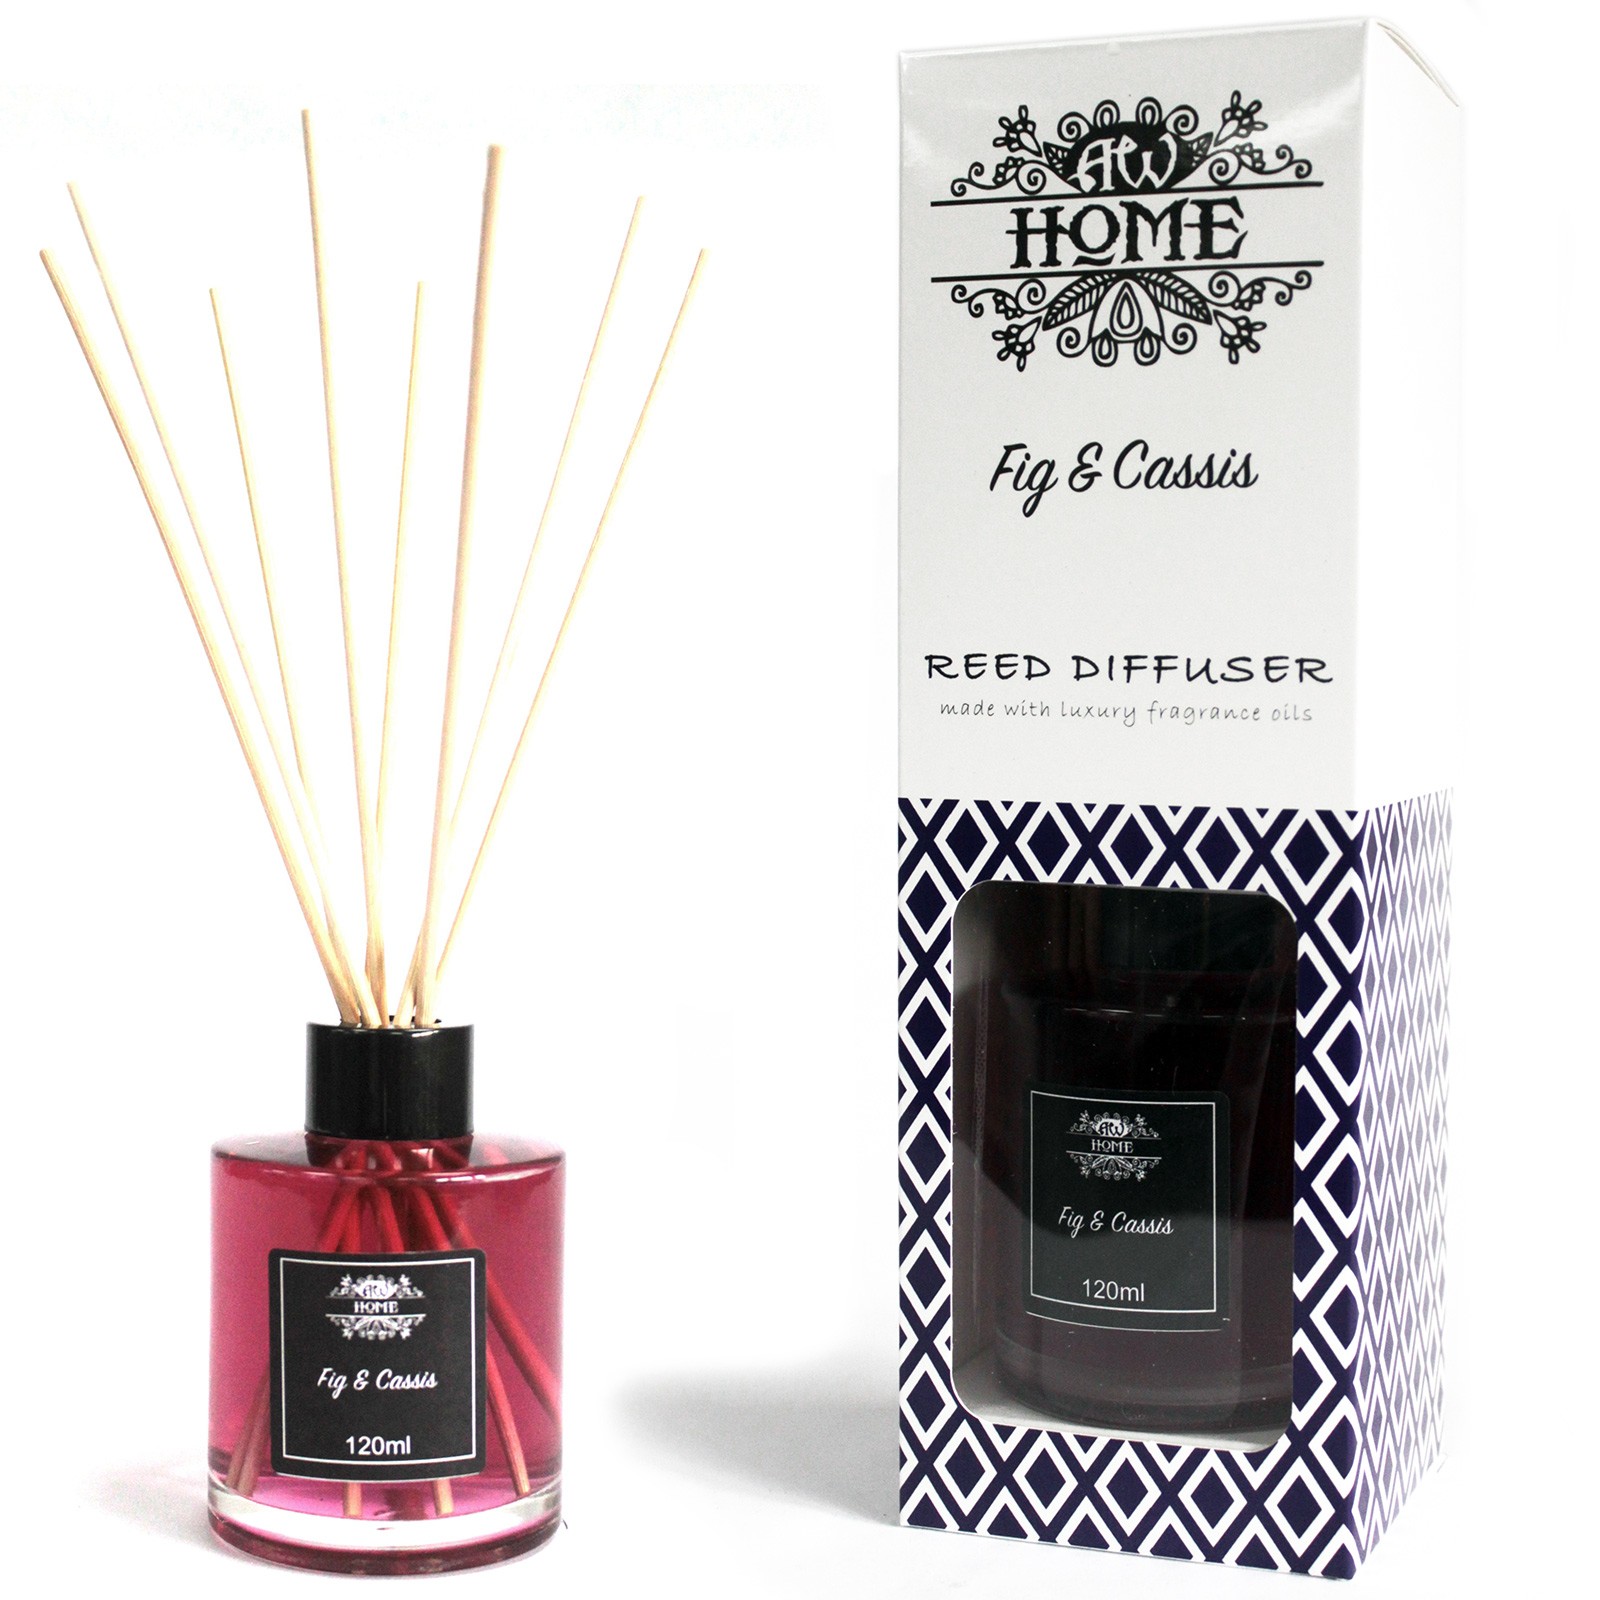 Fig & Cassis - Home Fragrance Reed Diffuser - 120ml With Reeds